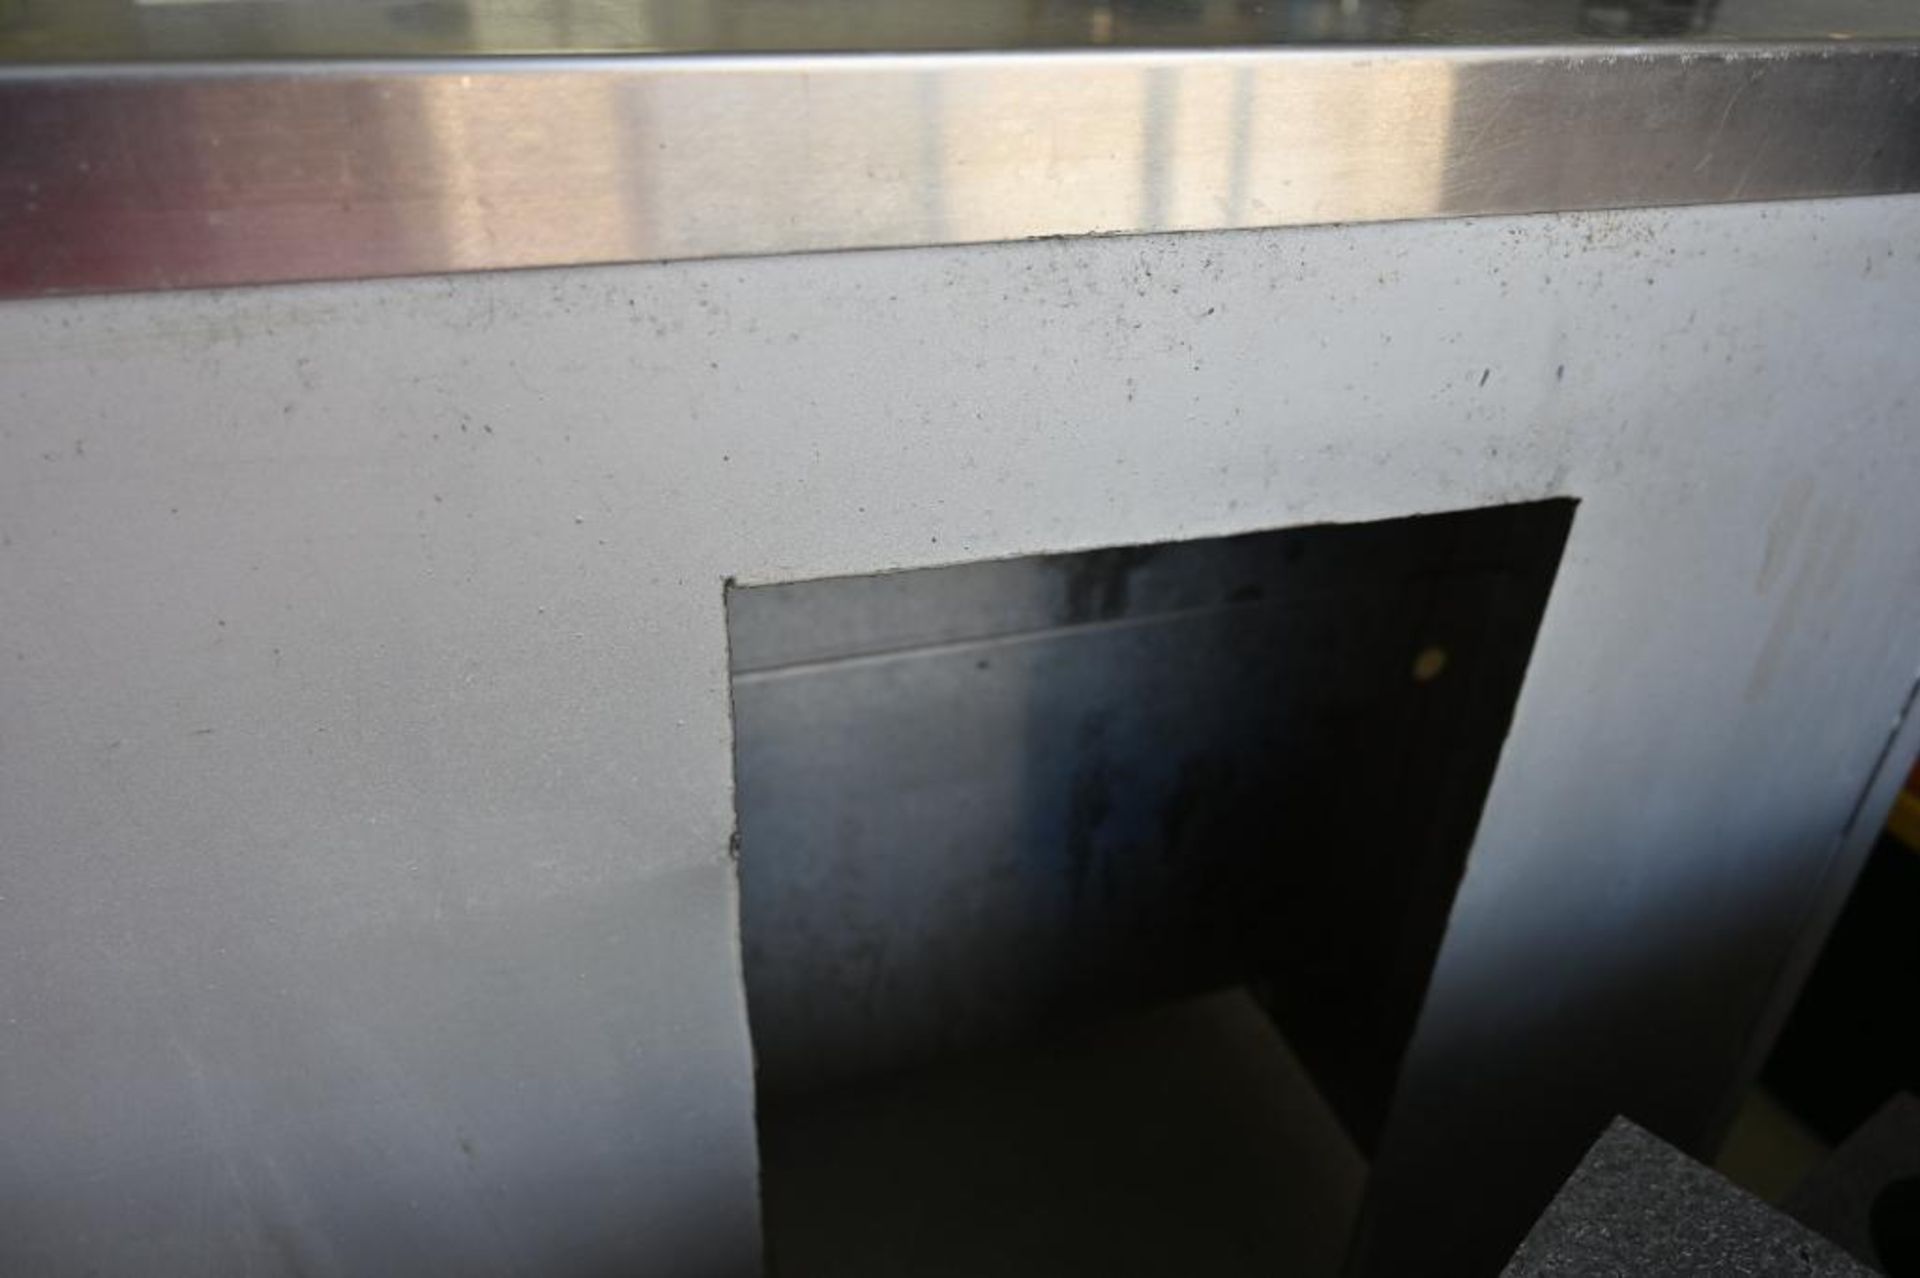 56.25" x 34" x 34.25" Stainless Steel Table with Two Shelves - Image 10 of 10